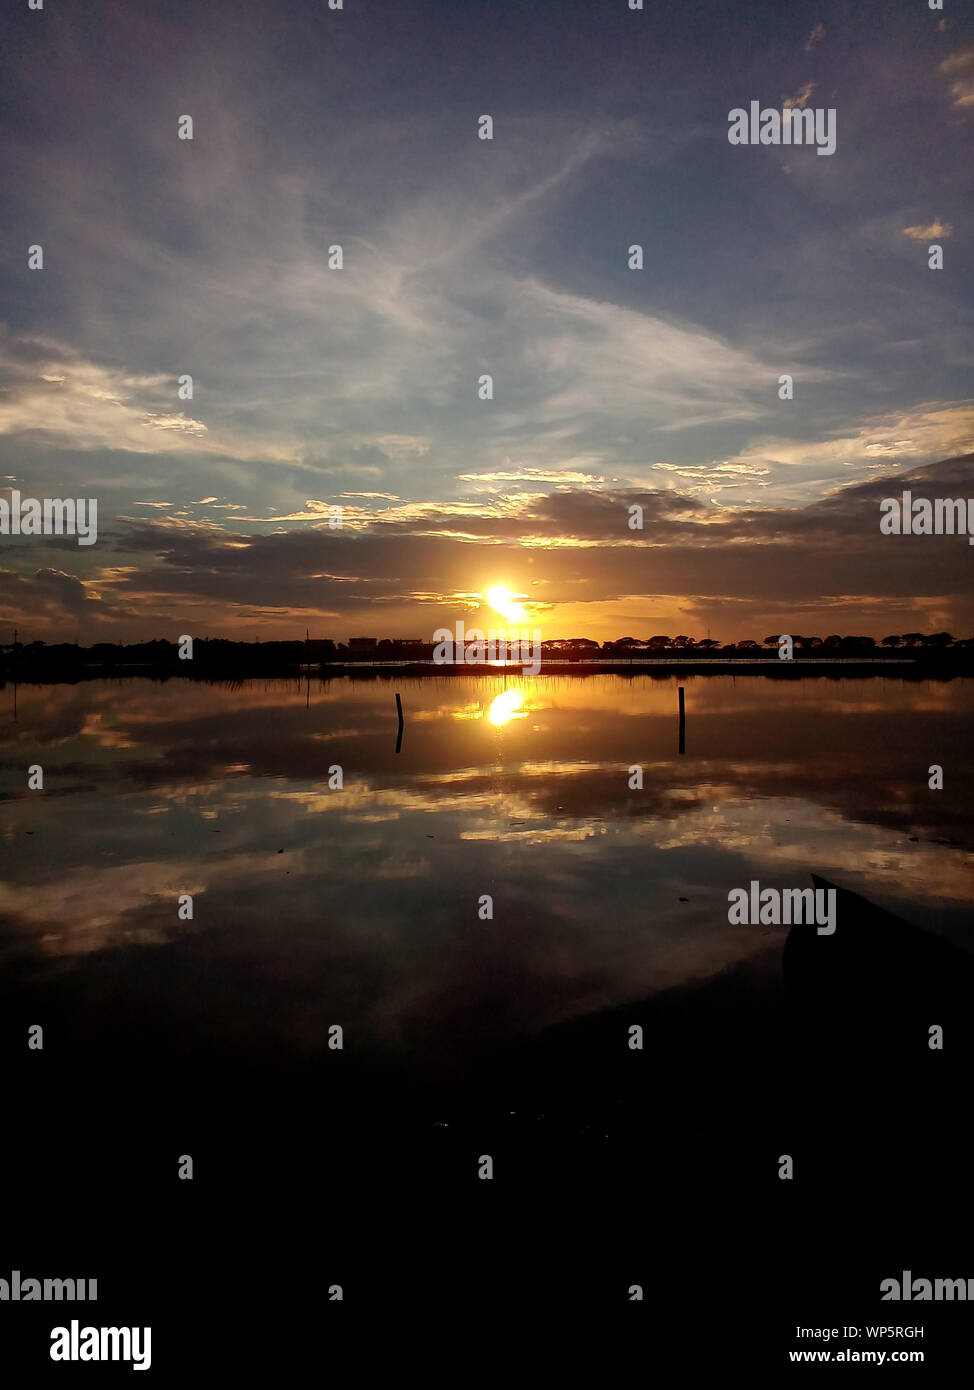 Sunset on cloudy blue sky with water reflections, Landscape Stock Photo